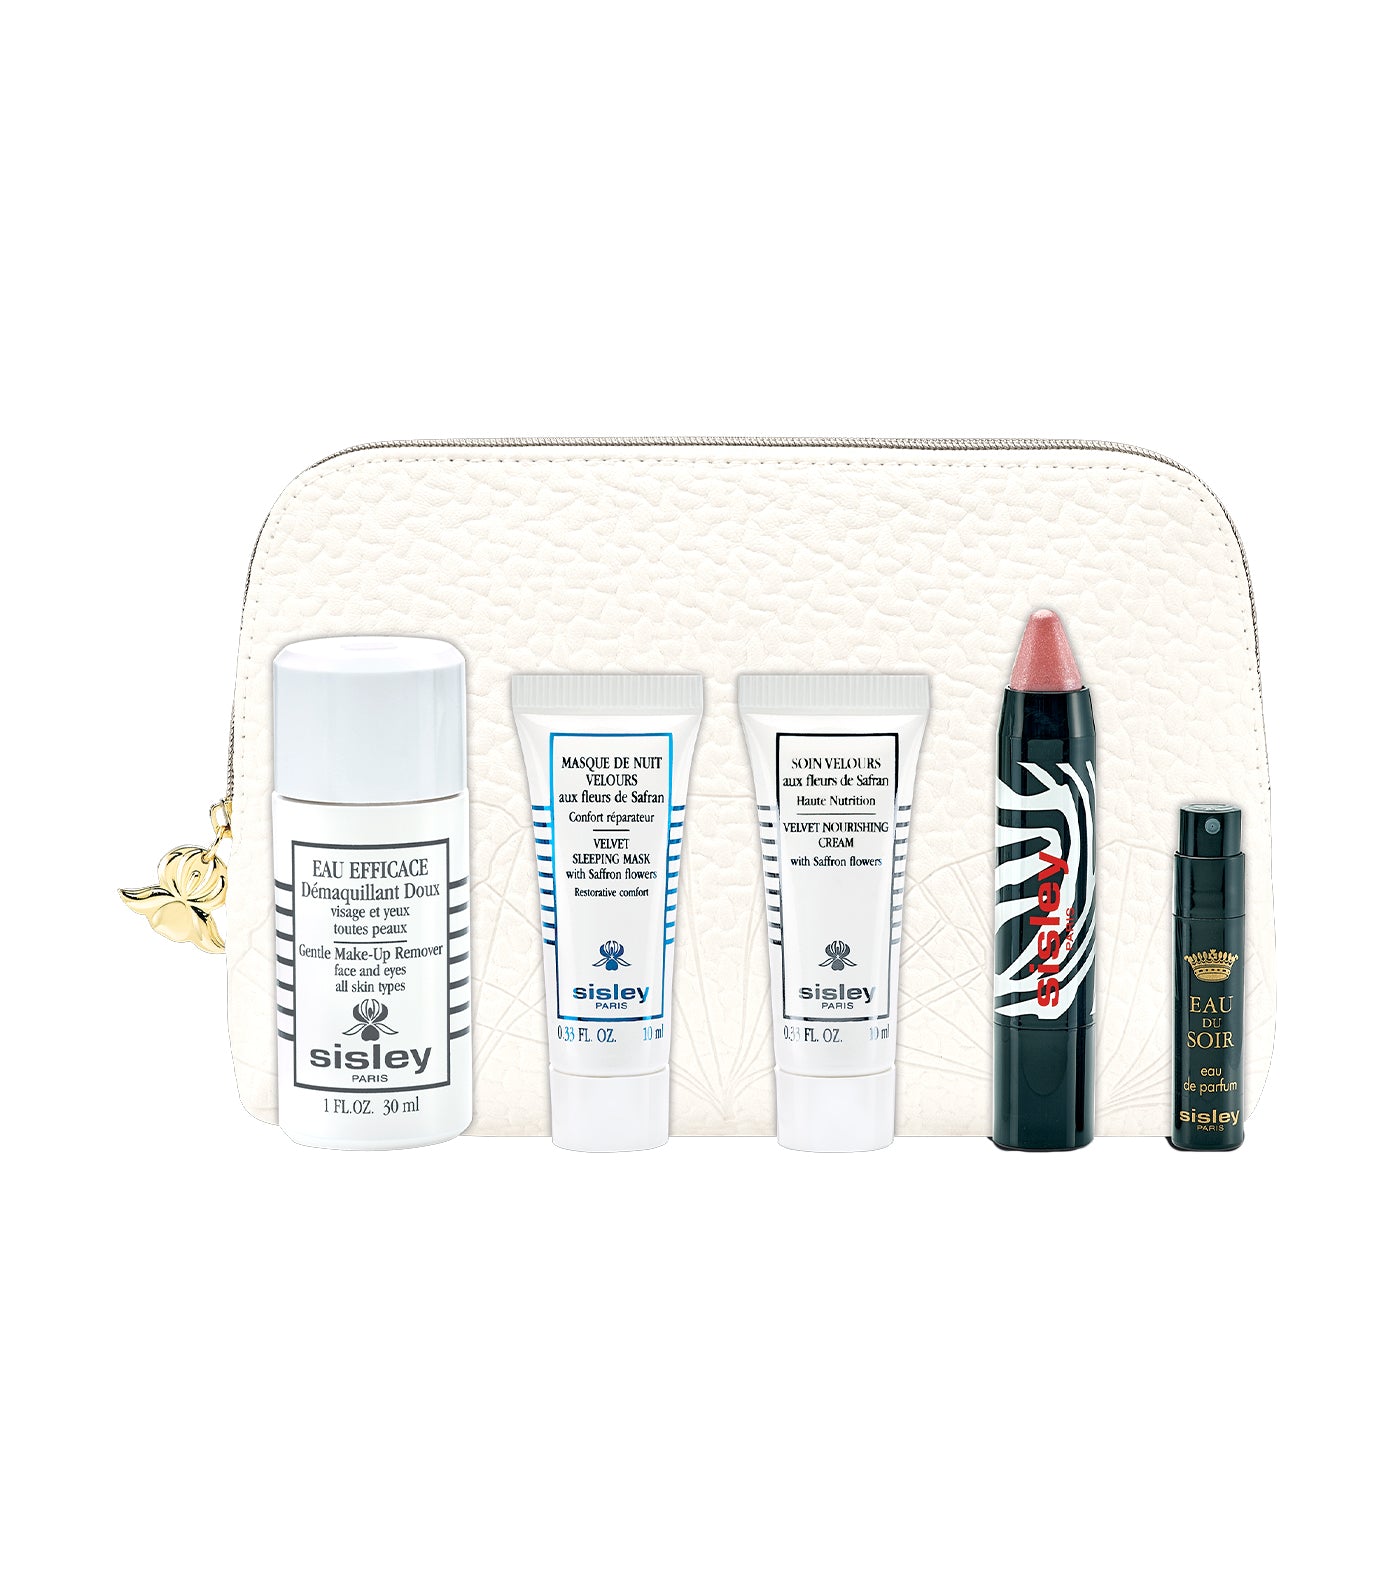 Complimentary Gingko Blanc Pouch and Sample Set